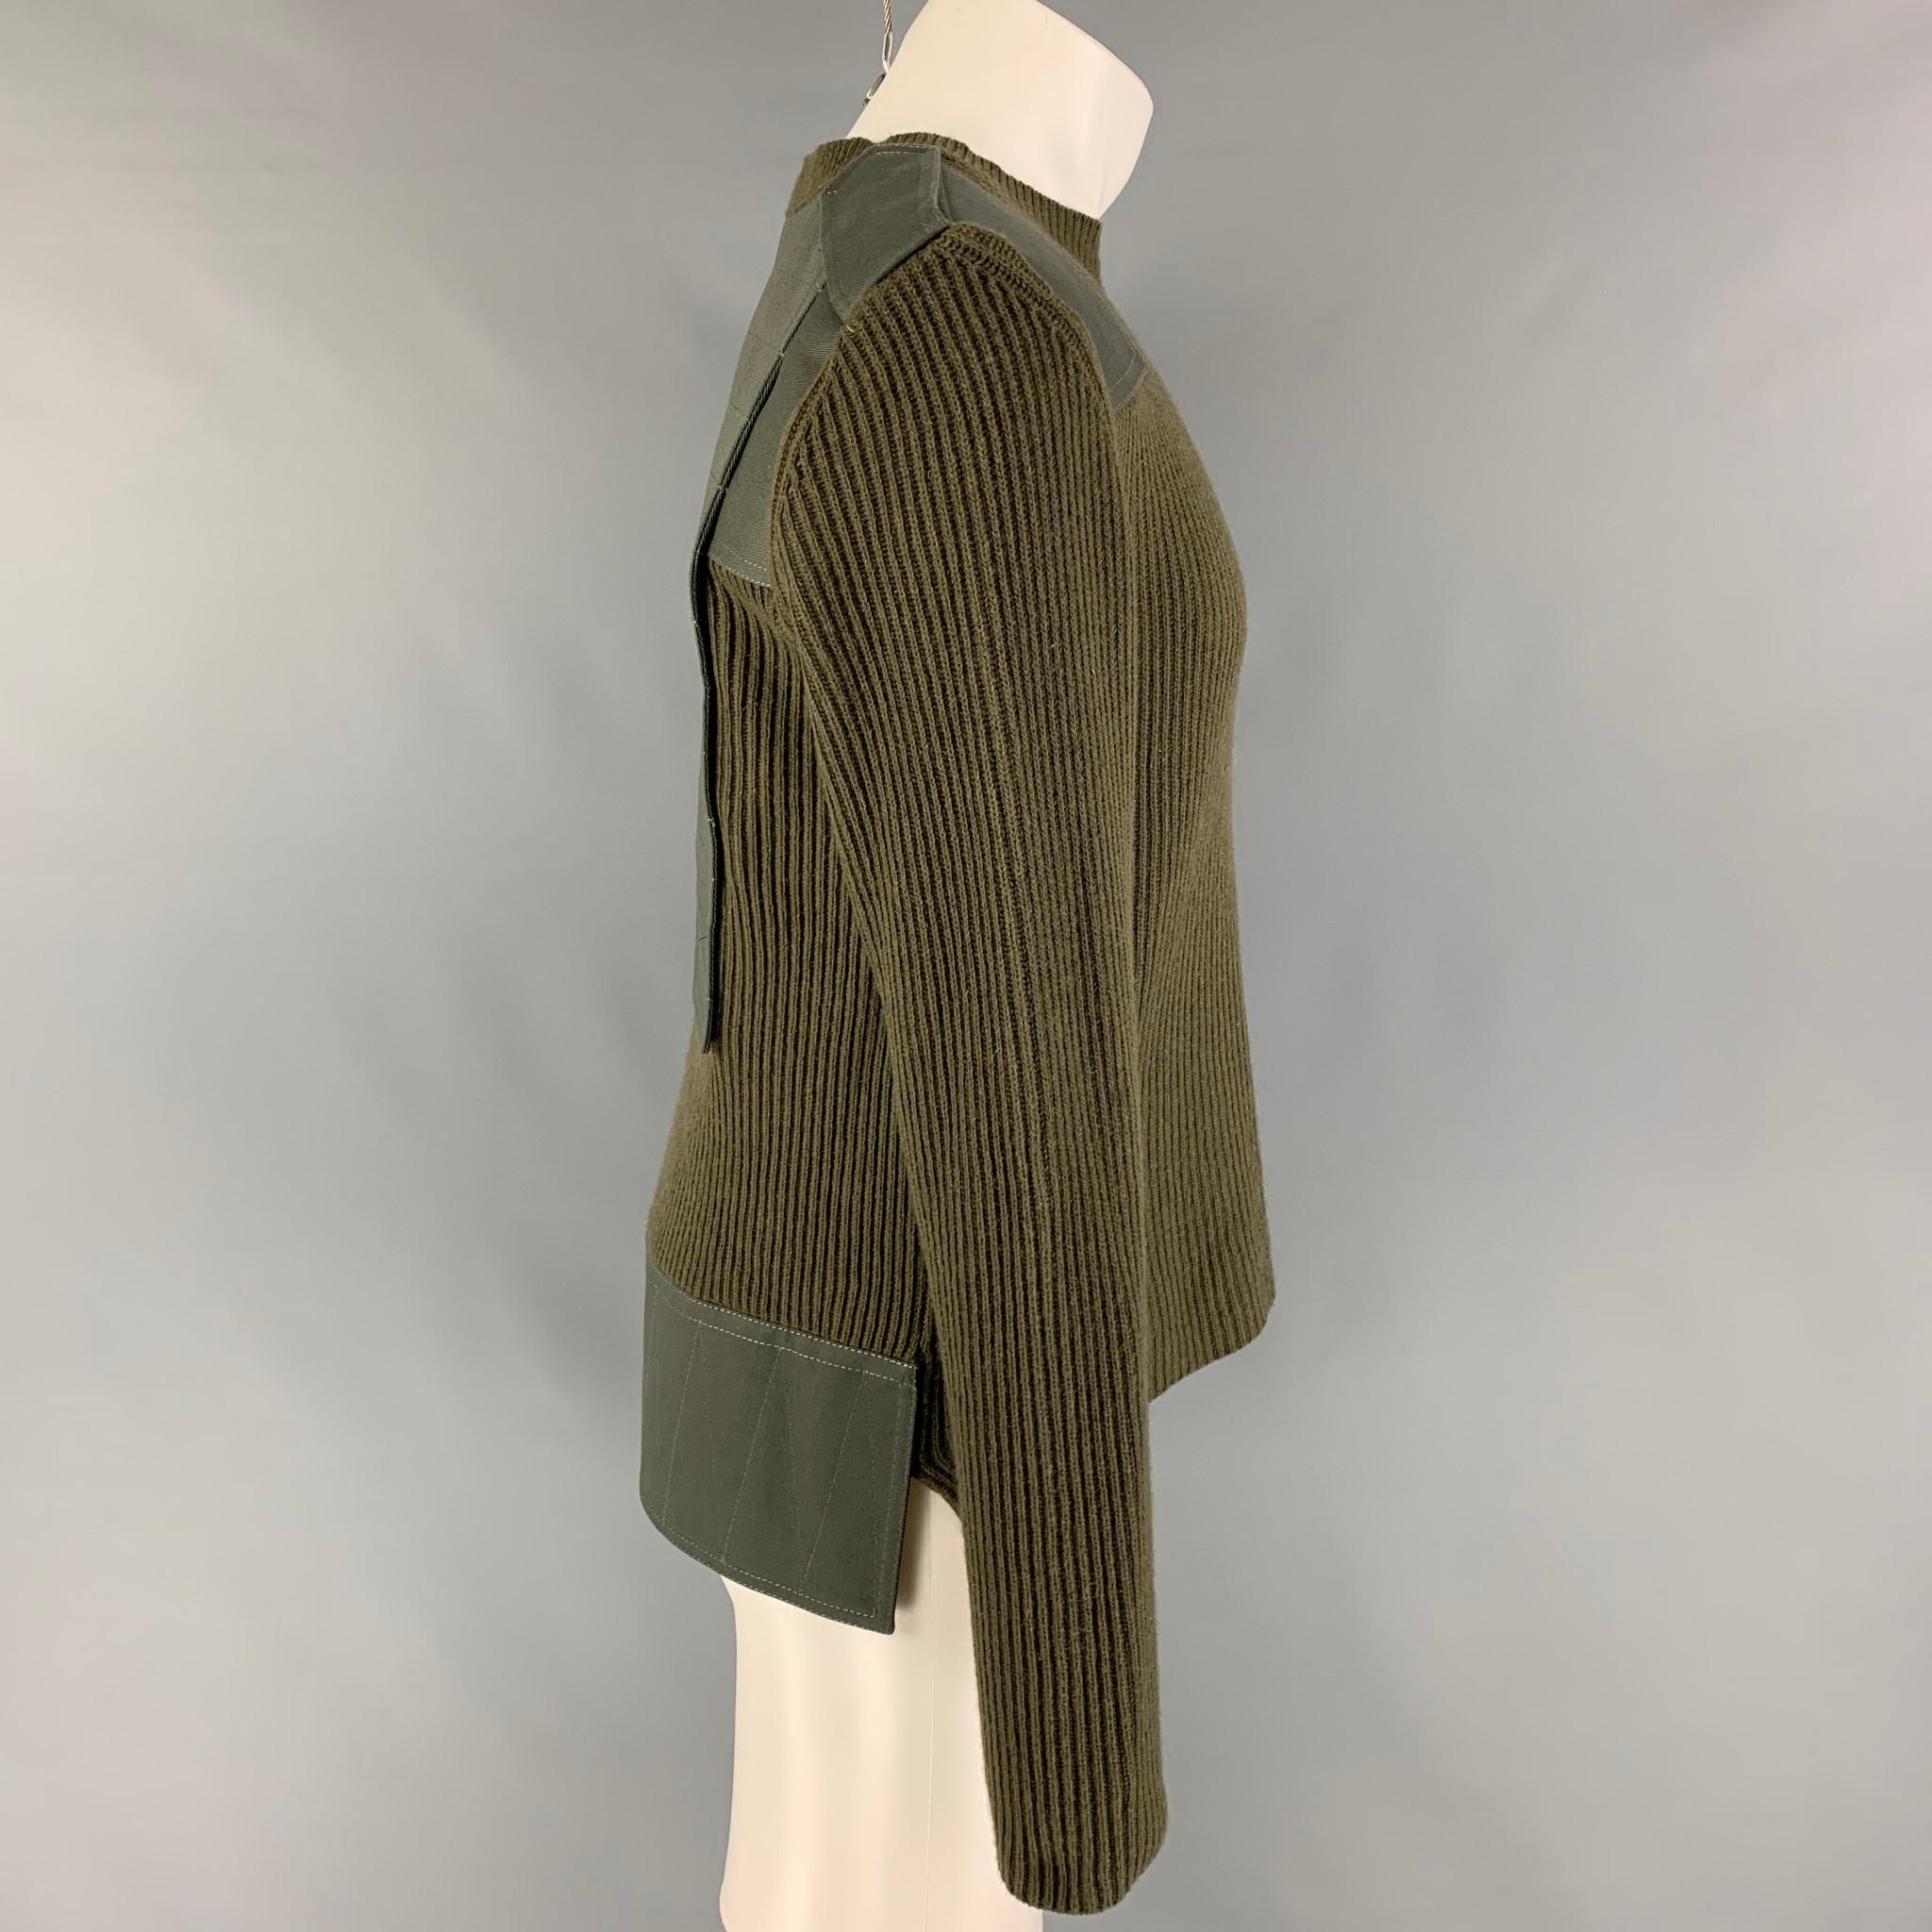 VALENTINO sweater comes in a green ribbed wool / cashmere featuring a military inspired design, stitched panels, and a crew-neck. Made in Italy. 

Very Good Pre-Owned Condition.
Marked: M
Original Retail Price: $1,440.00

Measurements:

Shoulder: 19